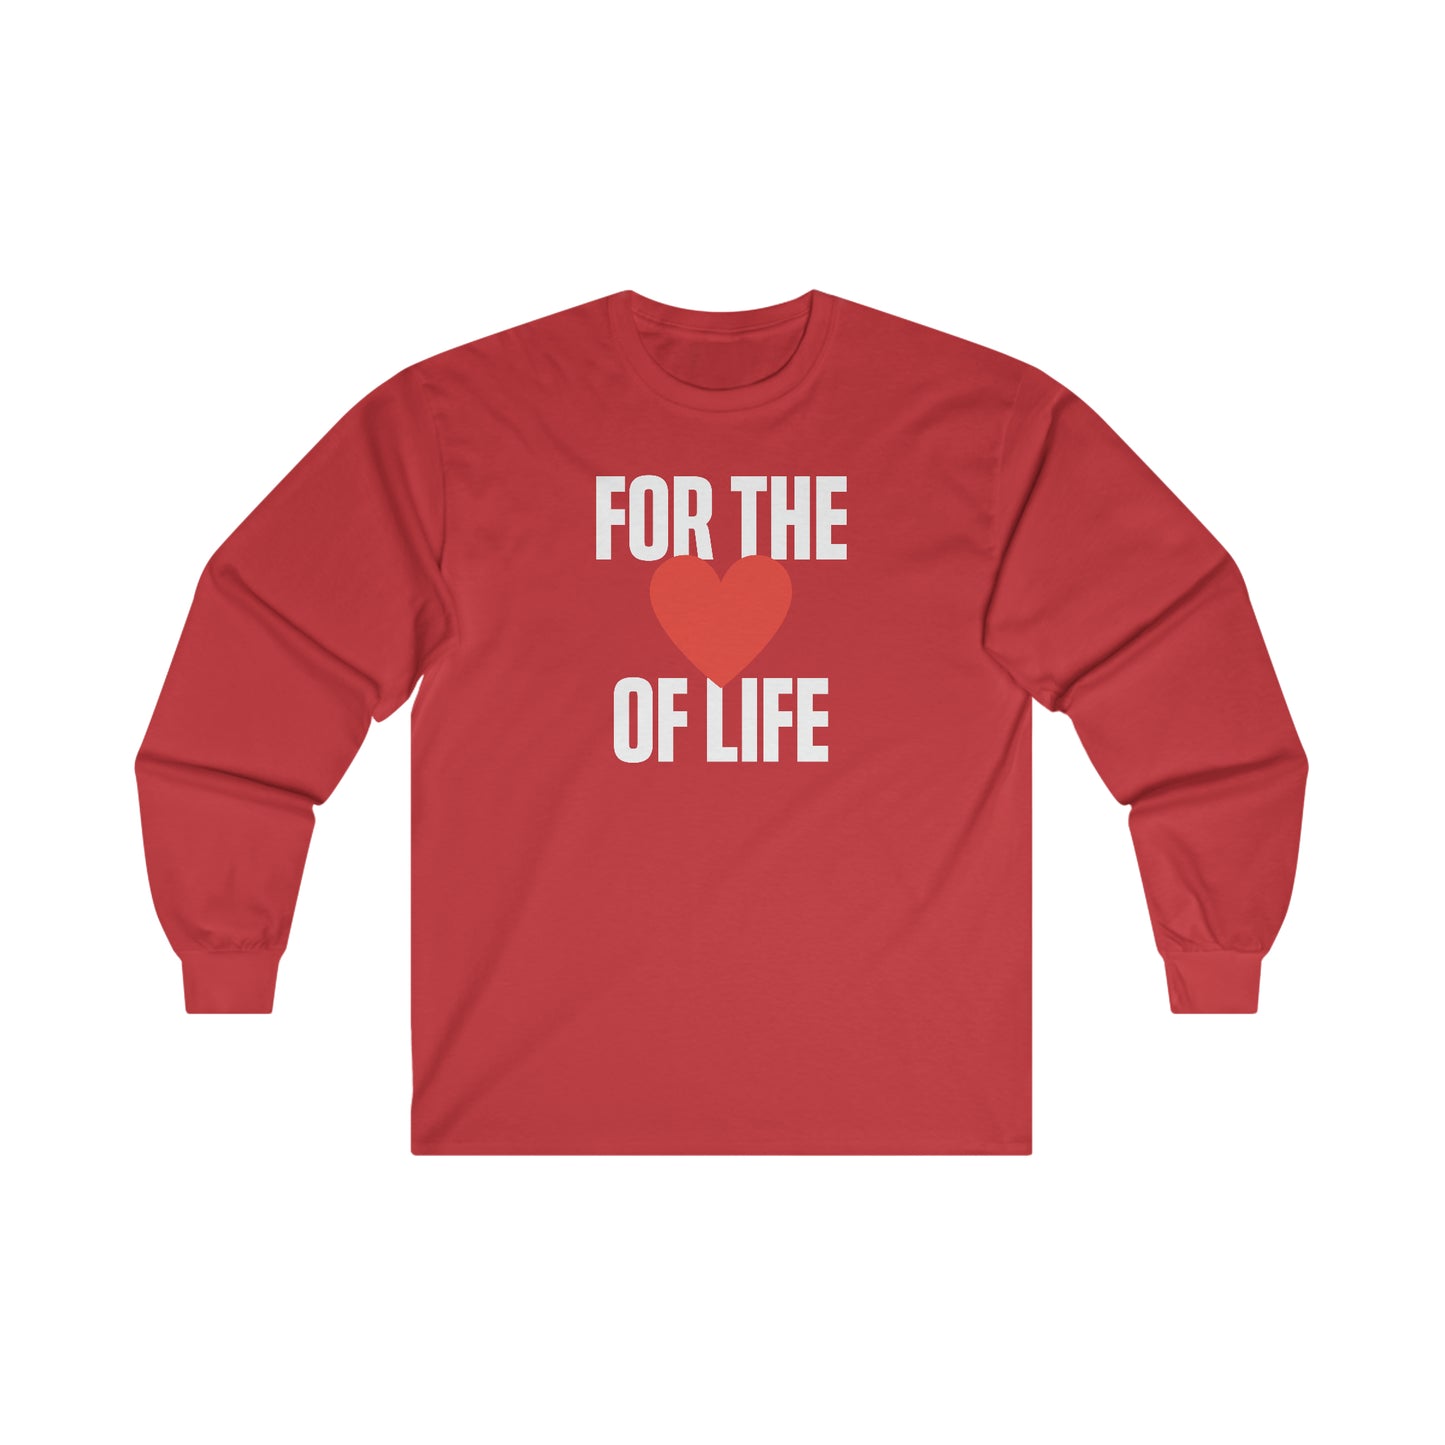 FOR THE LOVE OF LIFE | Long Sleeve Tee